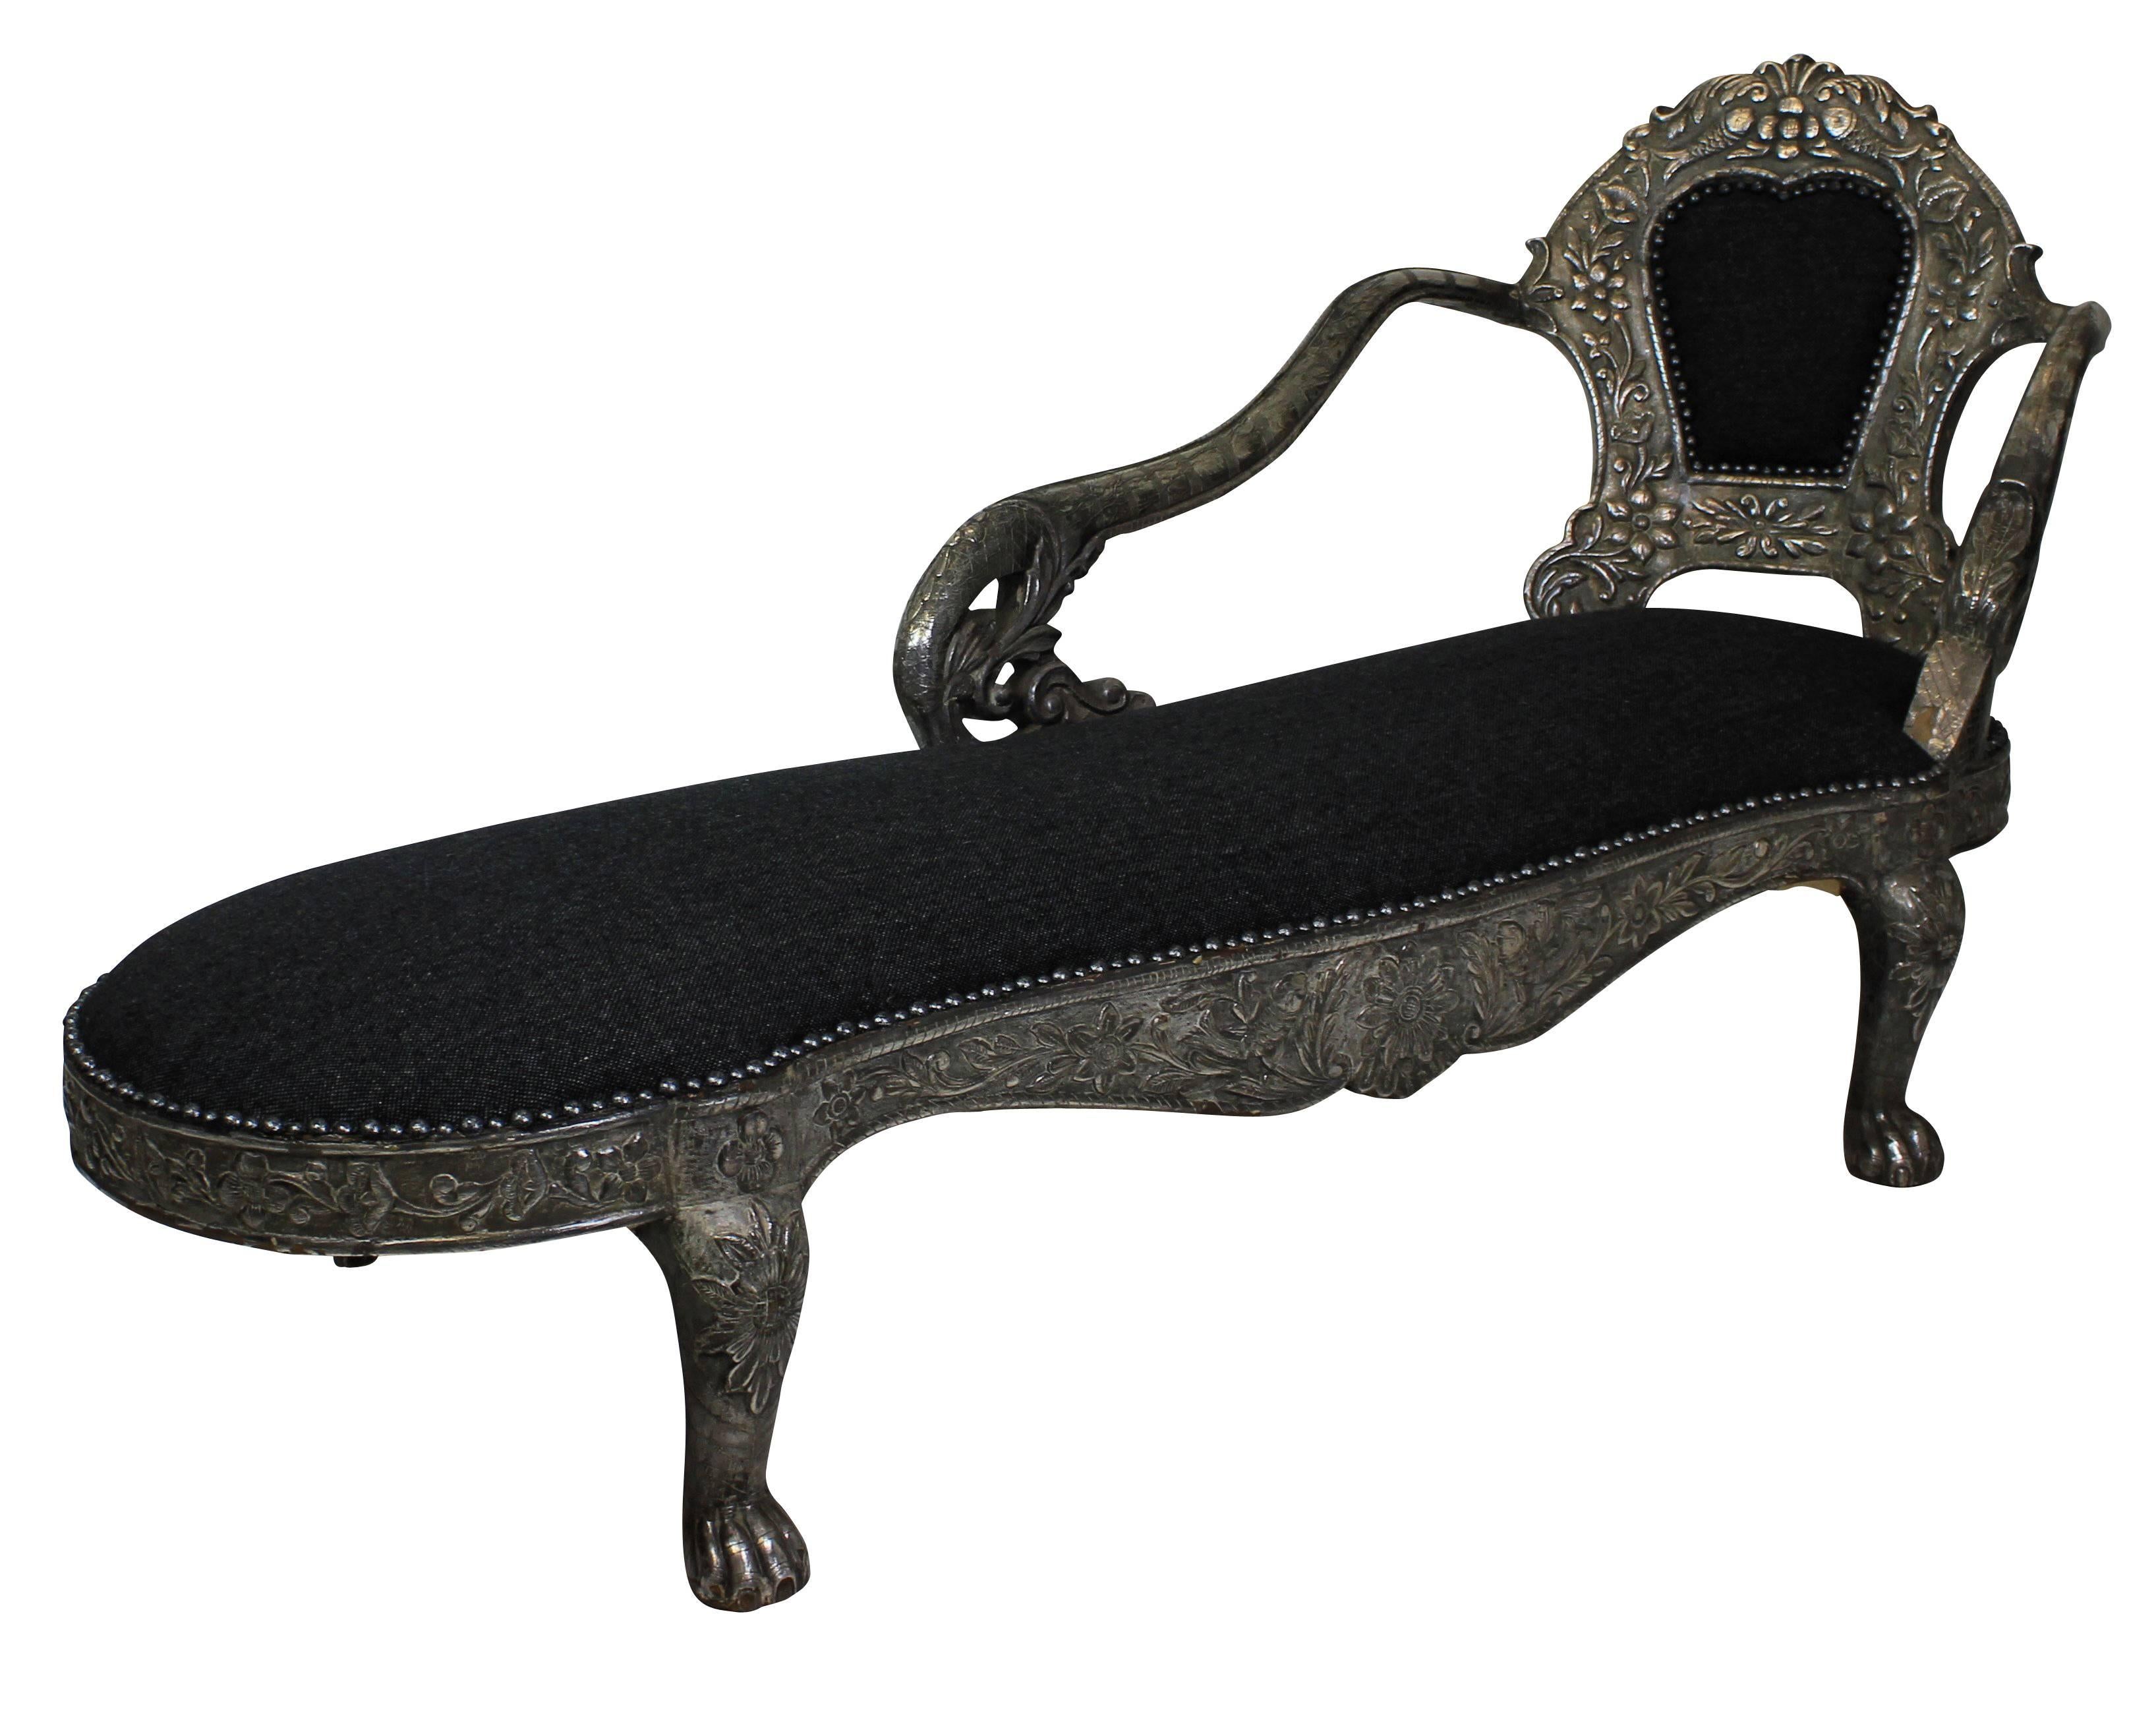 A fine Indian daybed in carved teak and covered in repousse silver depicting animals, birds and foliage on lion paw feet. Upholstered in grey wool and studded.